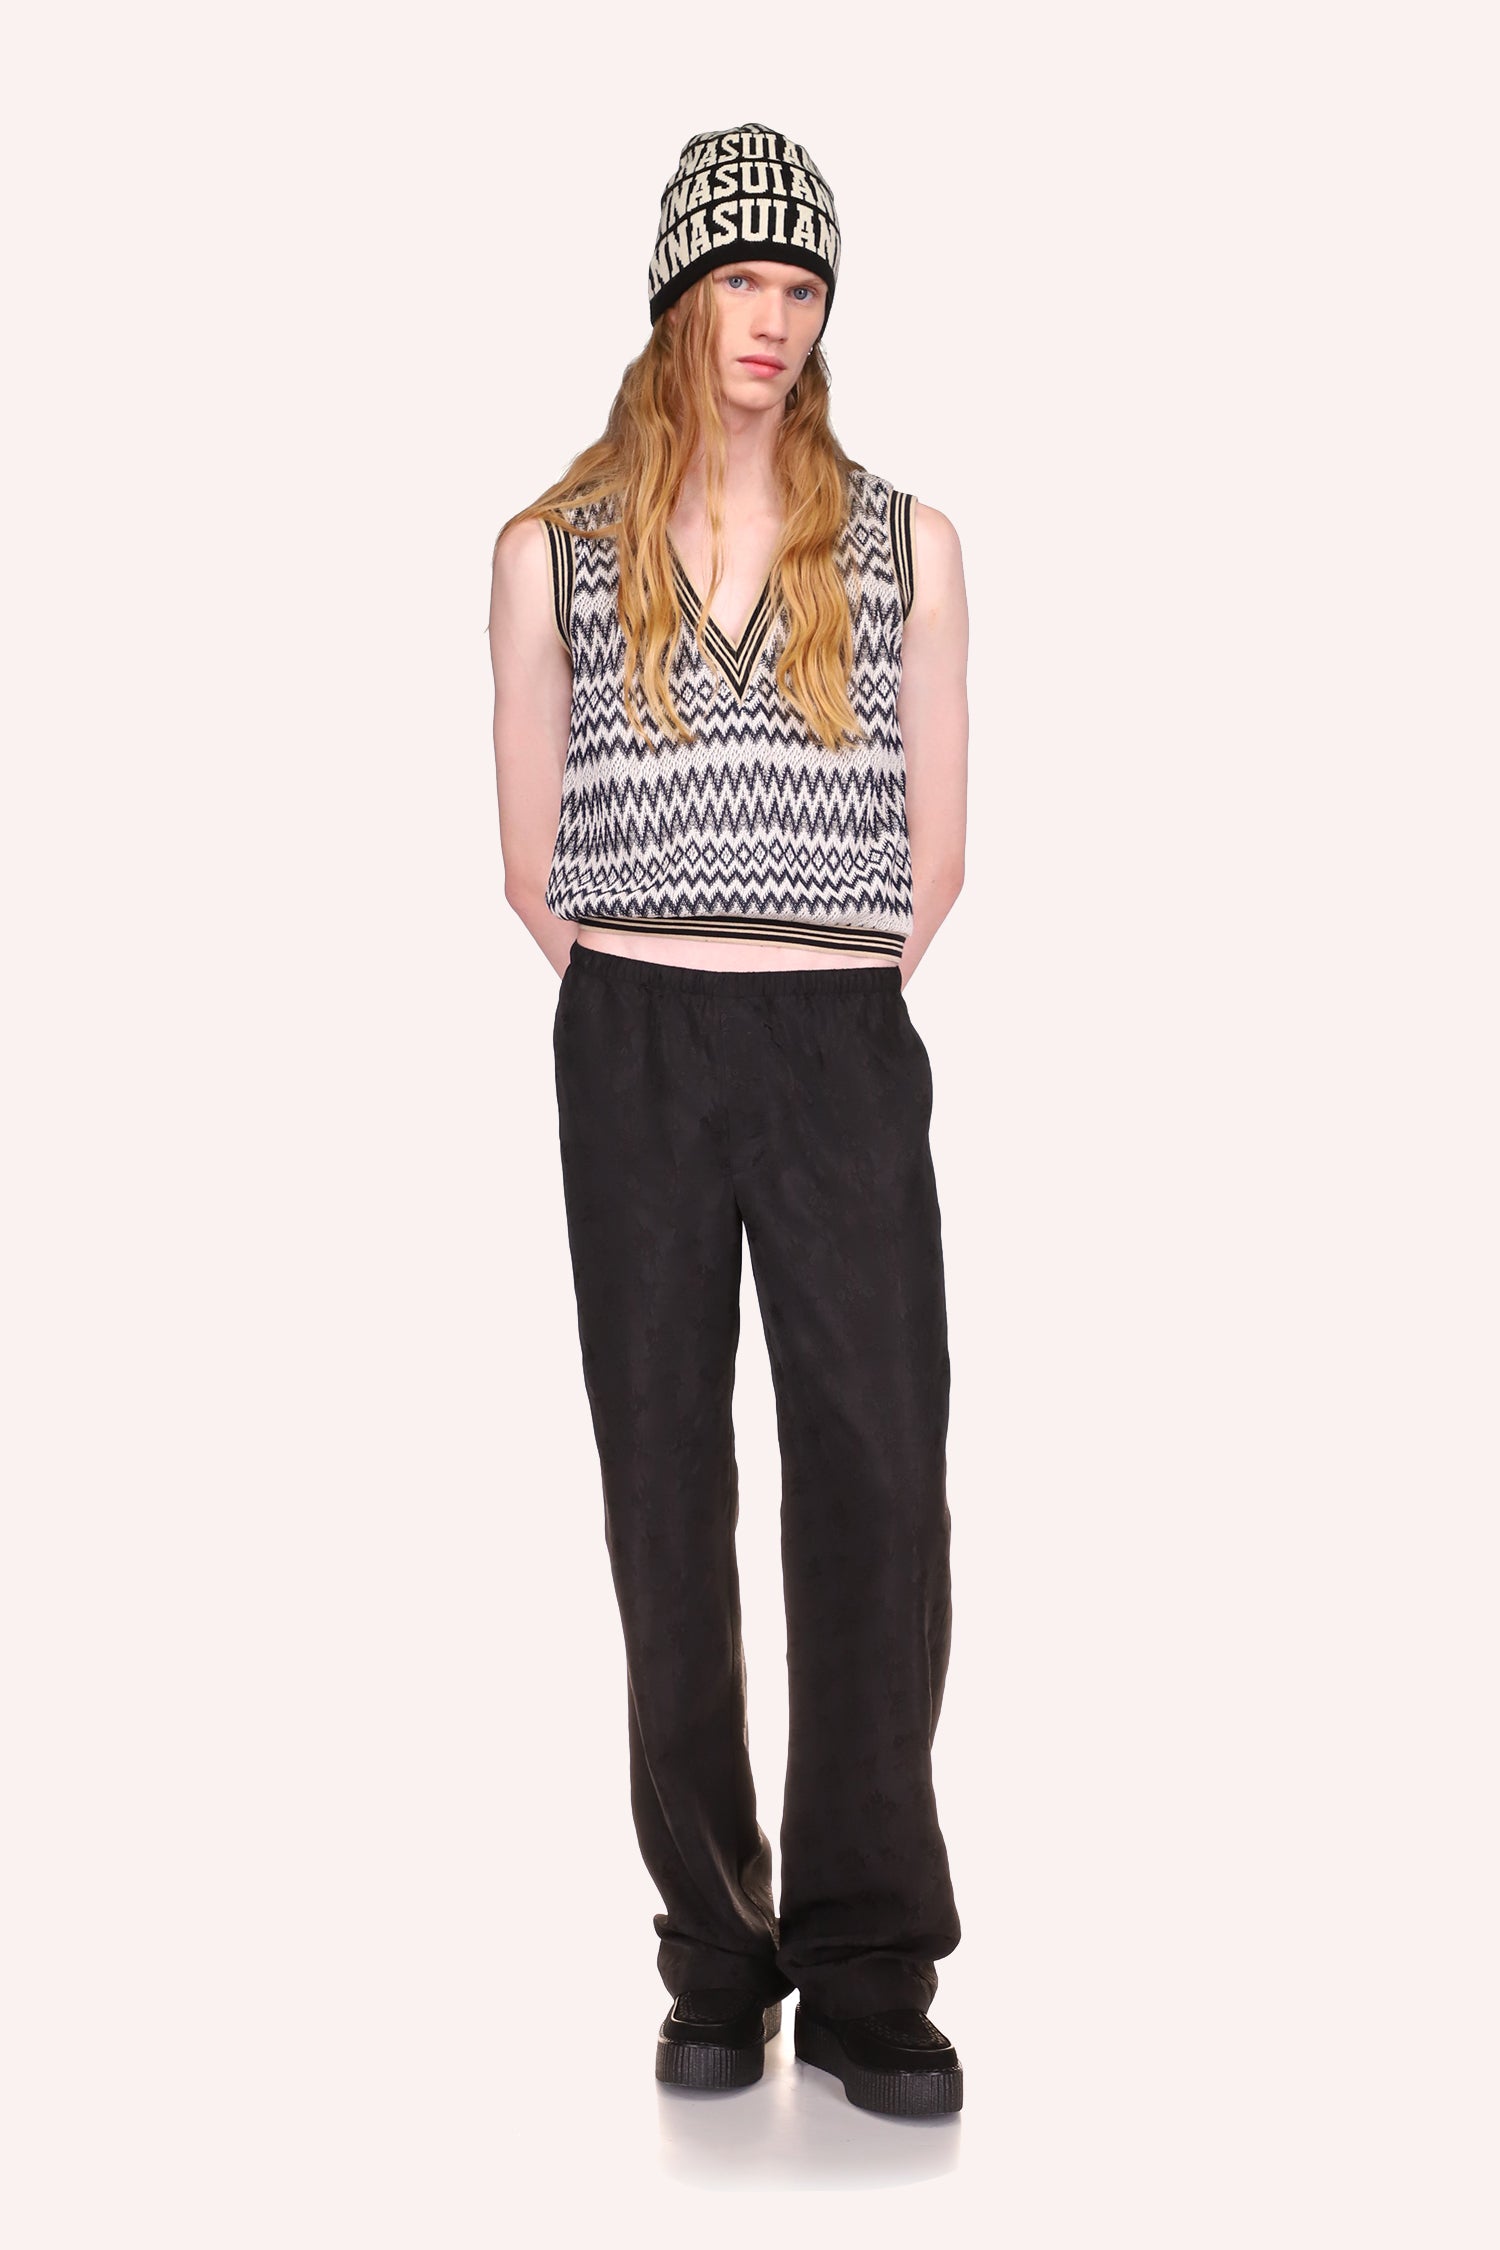 Floral Jacquard Pants is Black, long over the shoes, with a waist band paired with Zigzag Vest Black Multi